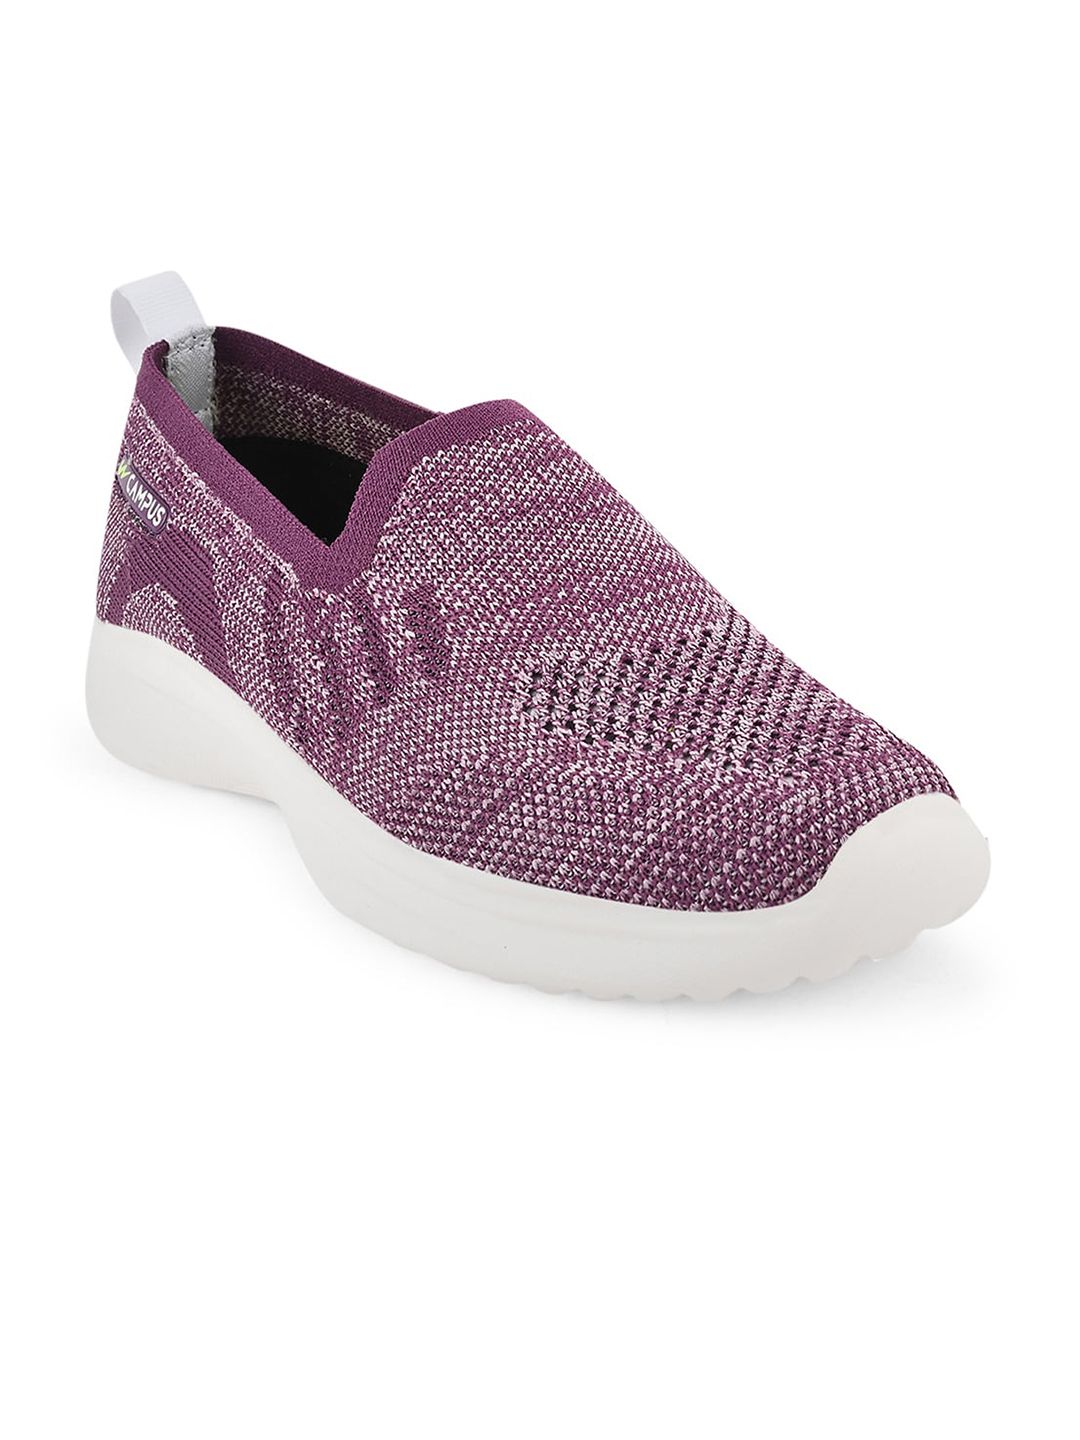 Campus Women Mesh Running Shoes Price in India